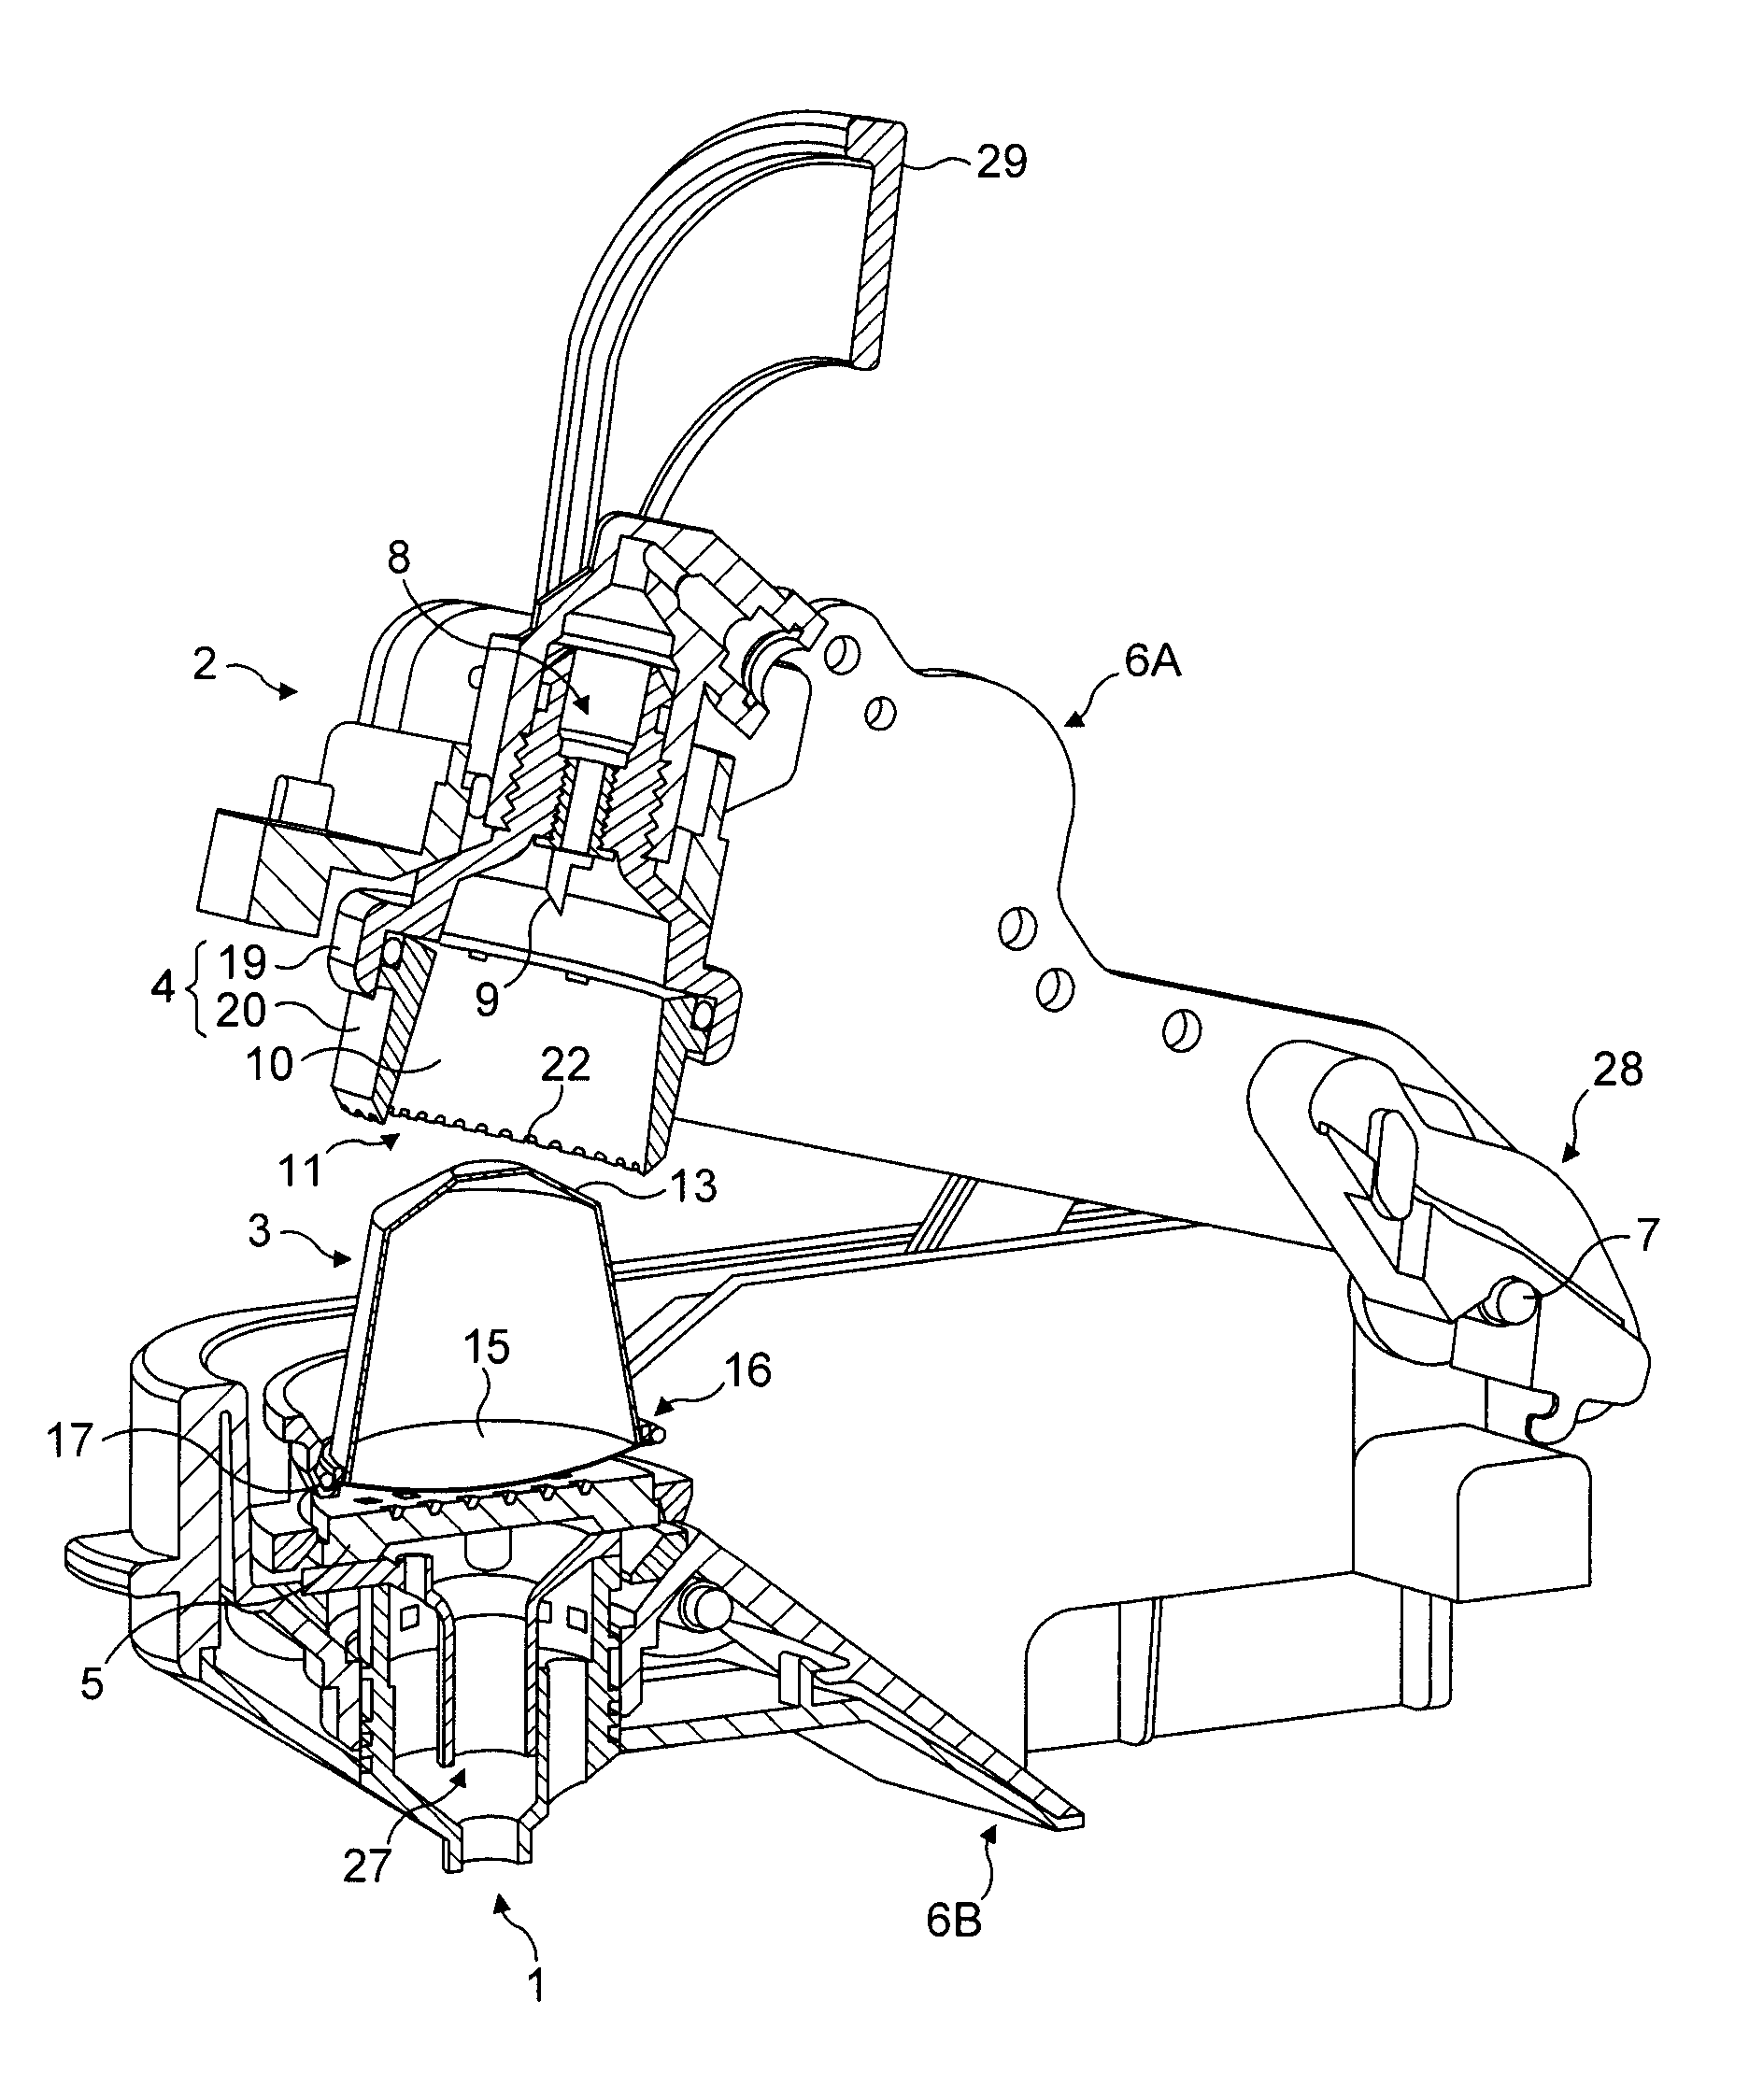 Sealing adapter for a beverage extraction system suitable for preparing a beverage from cartridges